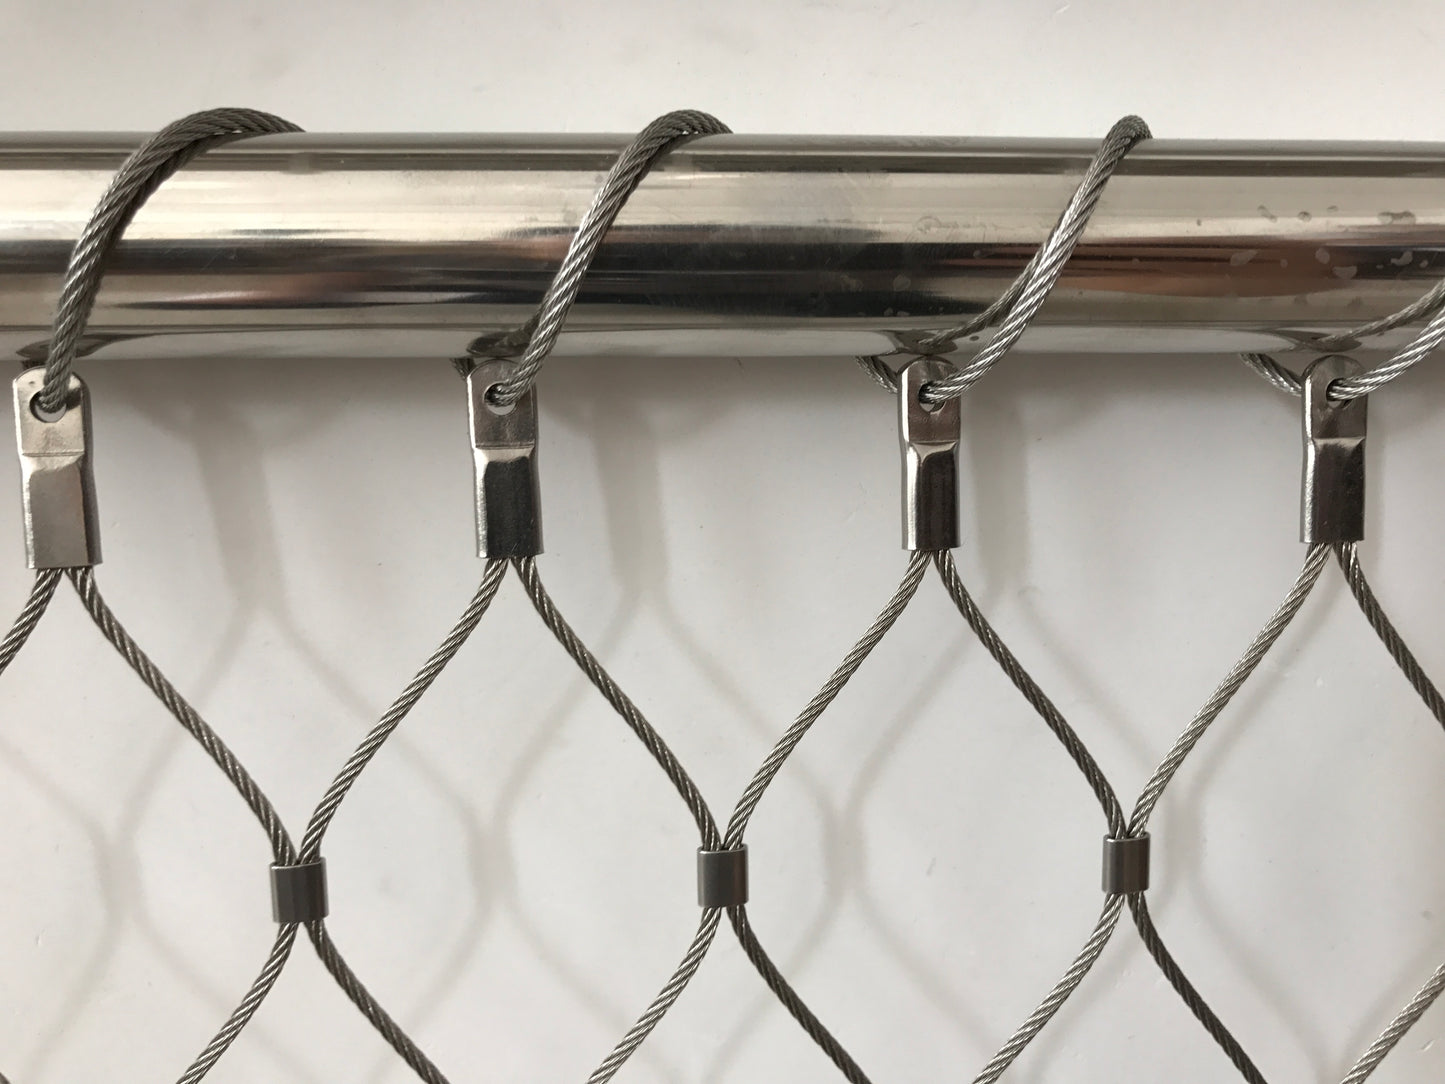 304 Stainless Steel Woven Wire Screen Mesh, Flexible Wire Mesh, Safety Net, Animal Poultry Cage Net, (Wire Diameter 1.5mm with 12m Winding Wire & 6 Buckles), Color (Silver)